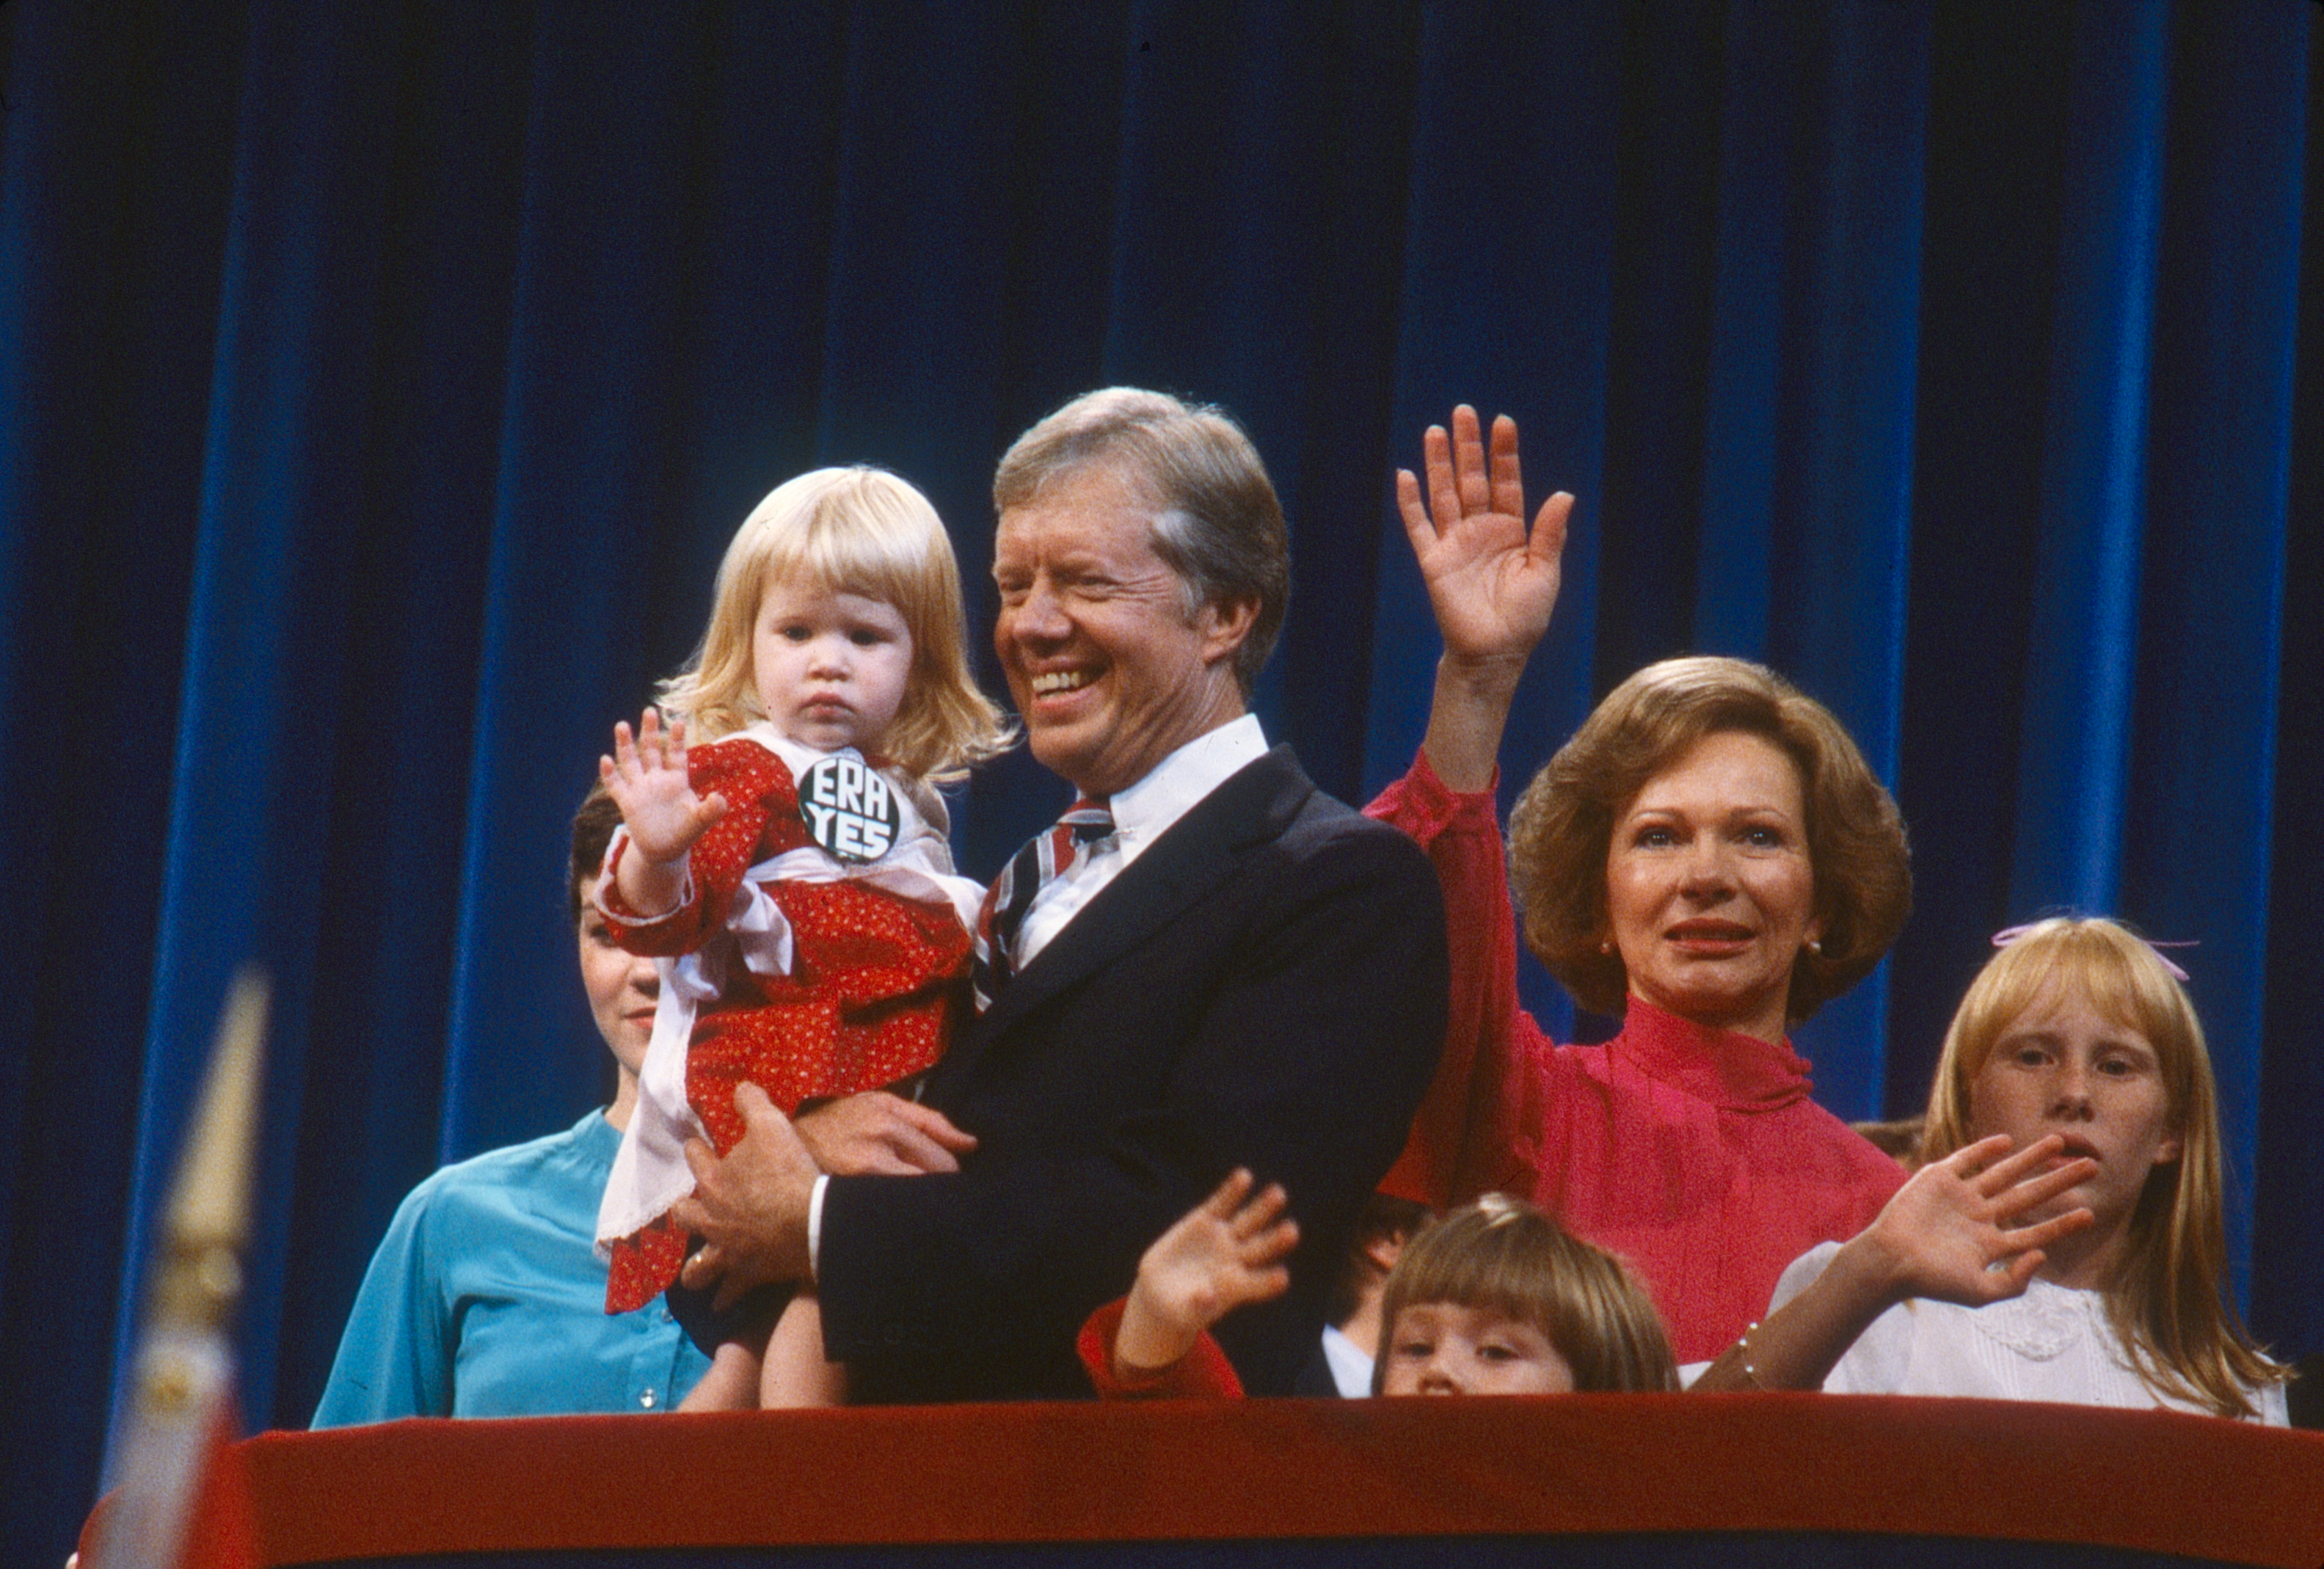 Sarah Carter, Jimmy Carter, Rosalynn Carter, Amy Carter (right), along with others, during the 1980 National Democratic Convention at Madison Square Garden on August 1,1 1980 in New York, New York. | Source: Getty Images